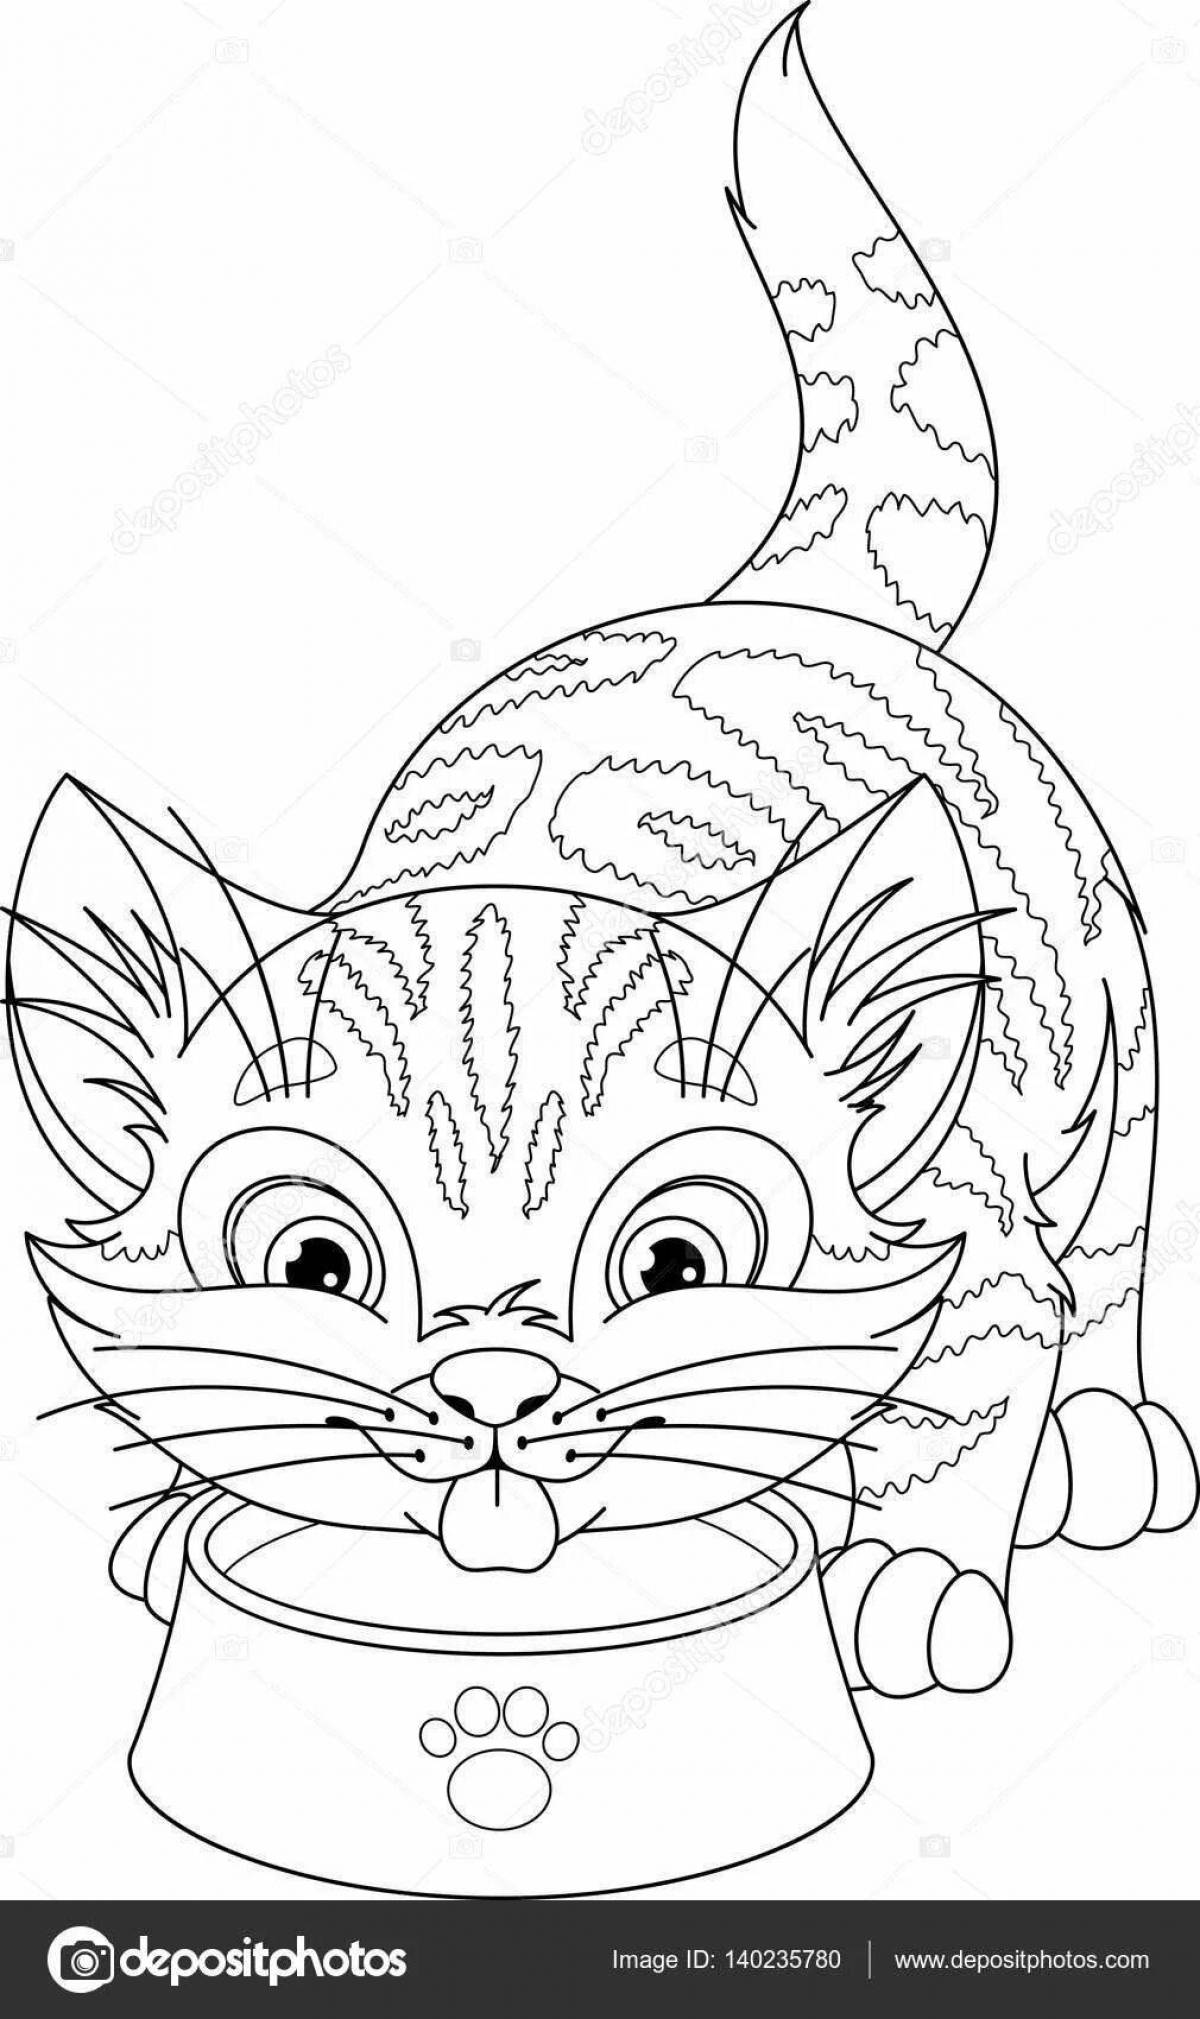 Coloring page funny cat drinking milk